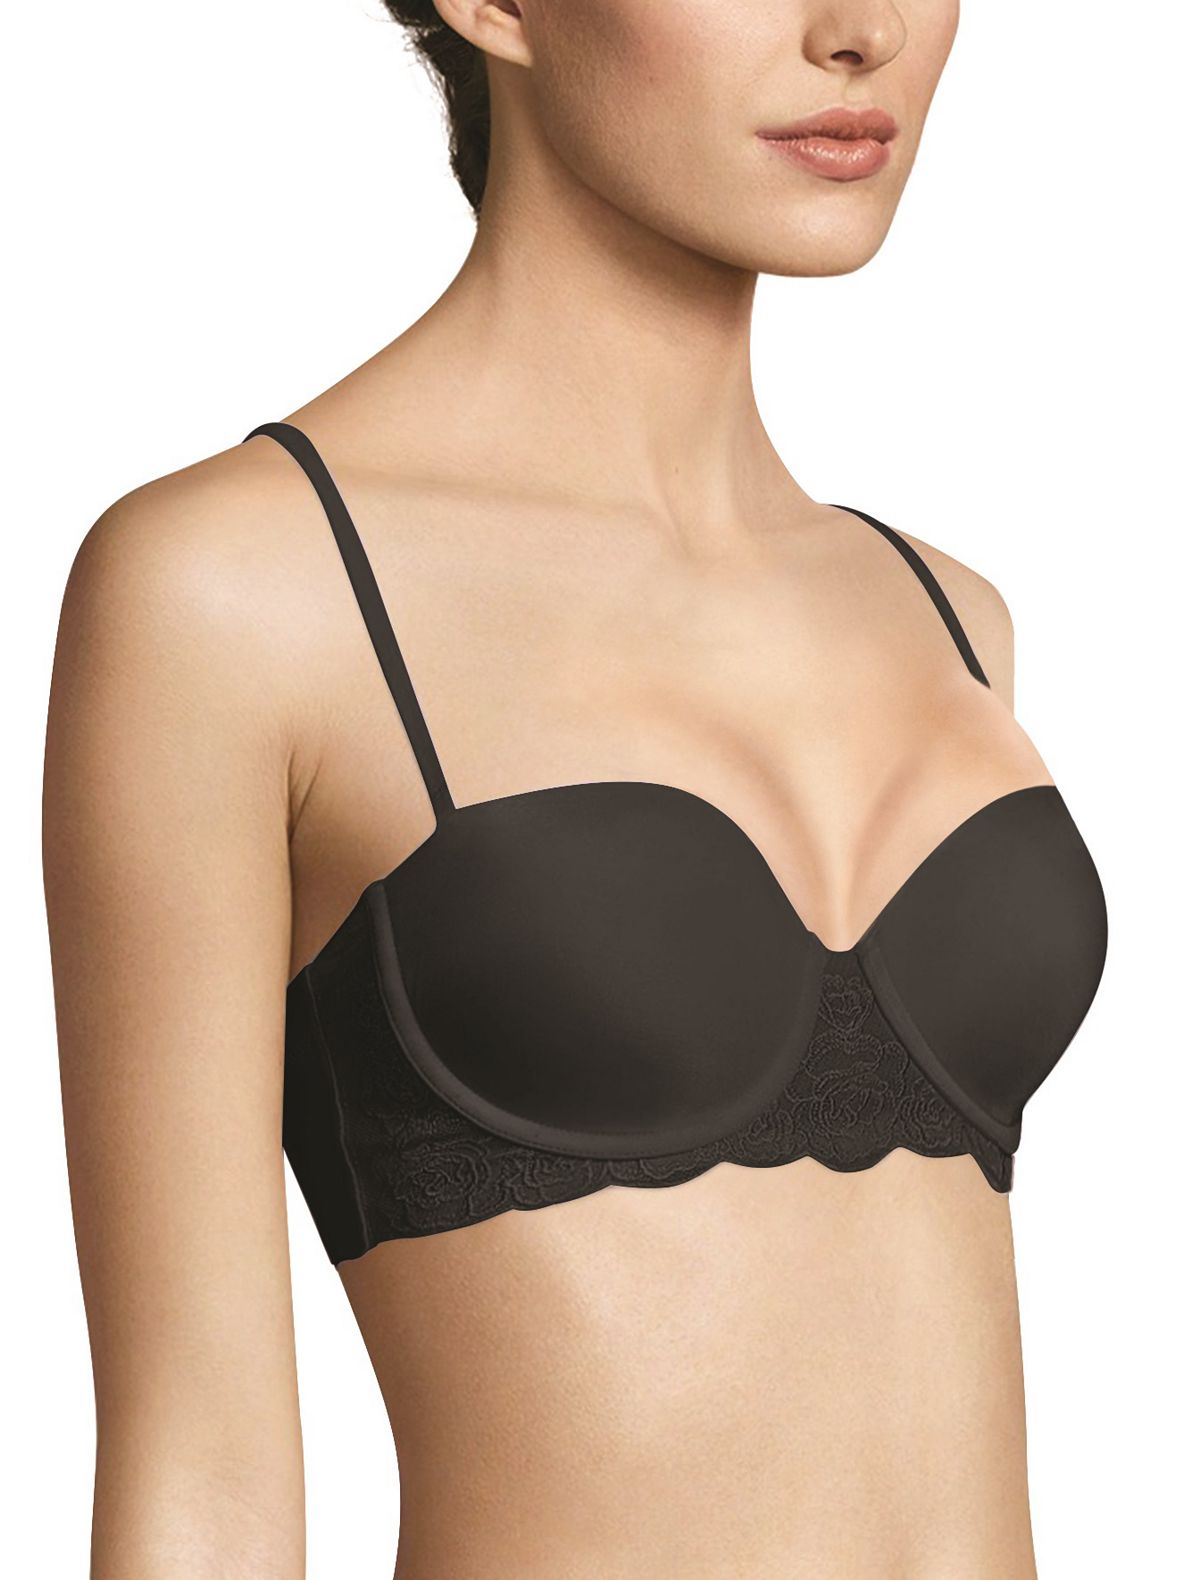 Maidenform Wo Love The Lift Embroidered Push-up Balconette Bra Dm9905 Black Lace